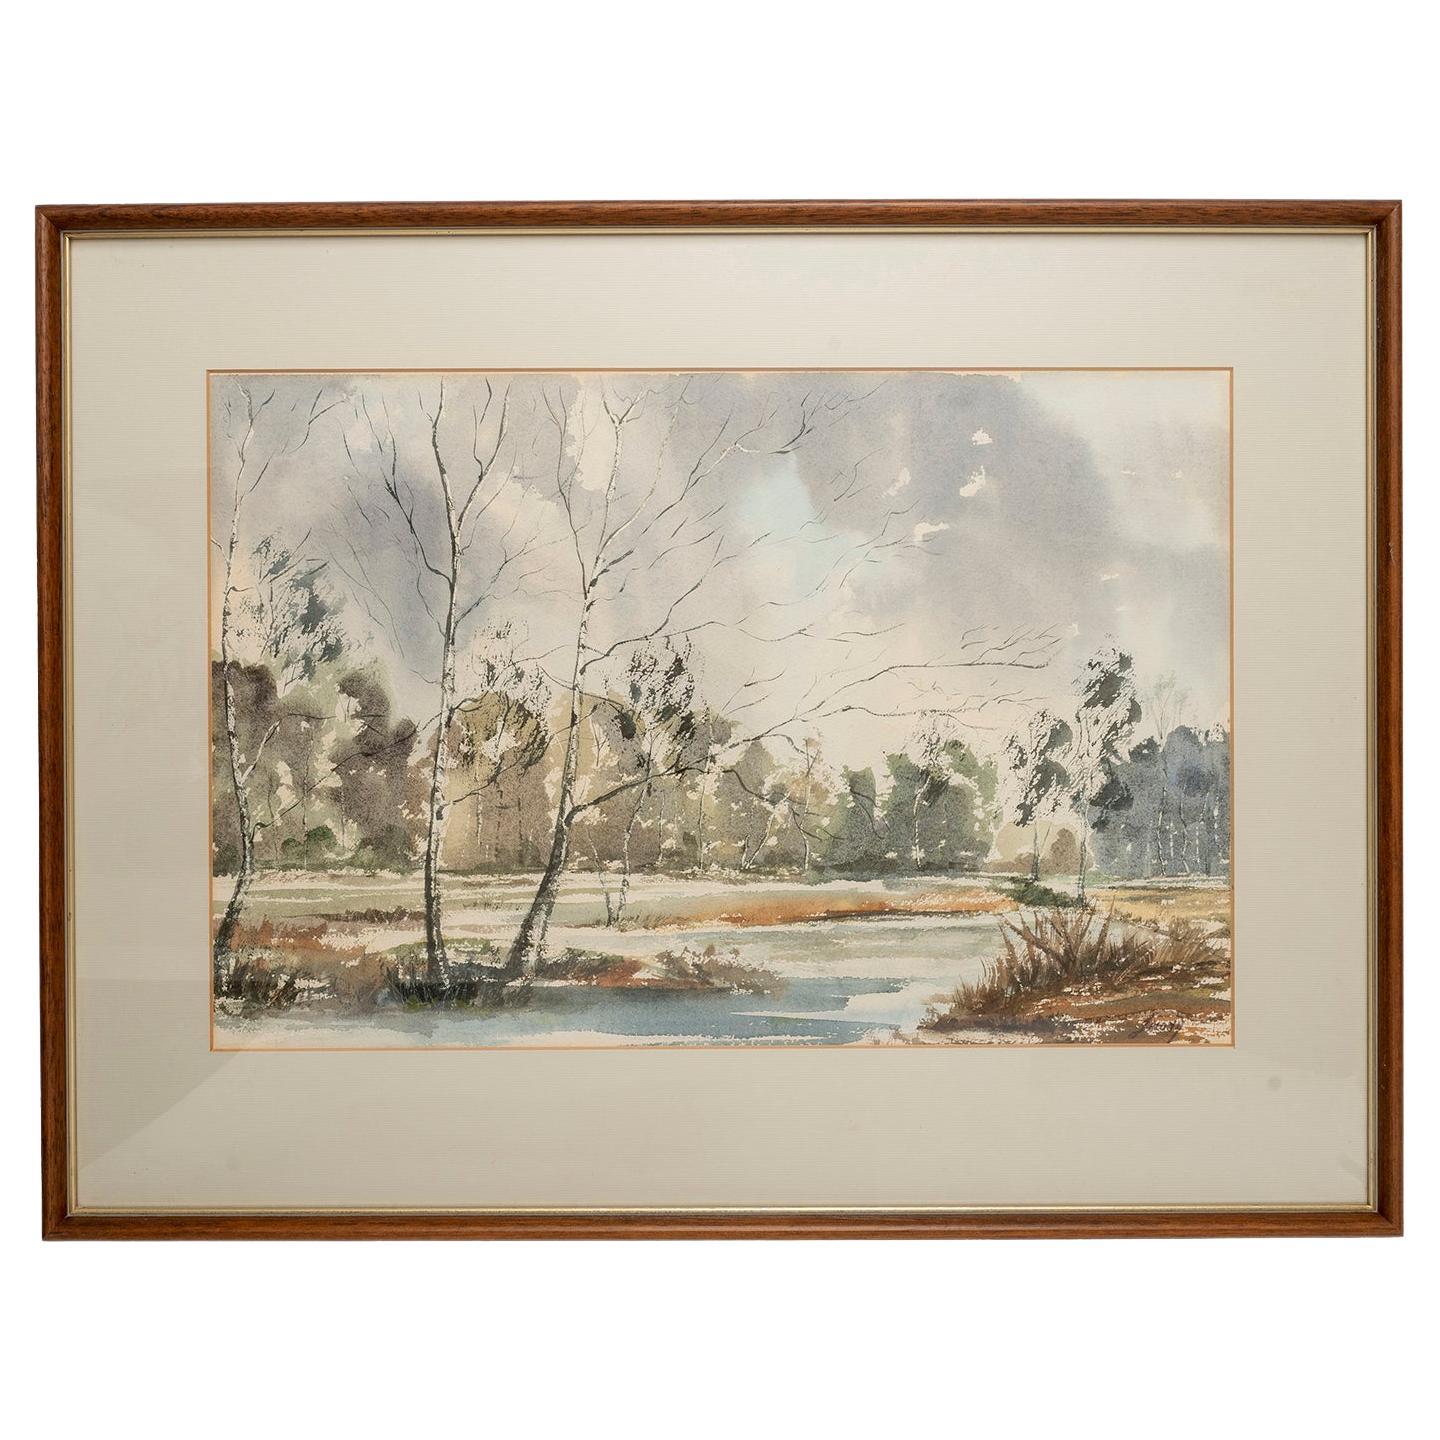 J. Lloyd : Pair of watercolours, c1920
Beautiful composition evoking the spirit and feeling of the two landscapes so that the viewer has the impression of being there
Soft delicate palette and handling of the watercolor

Measures: length 71cm.,